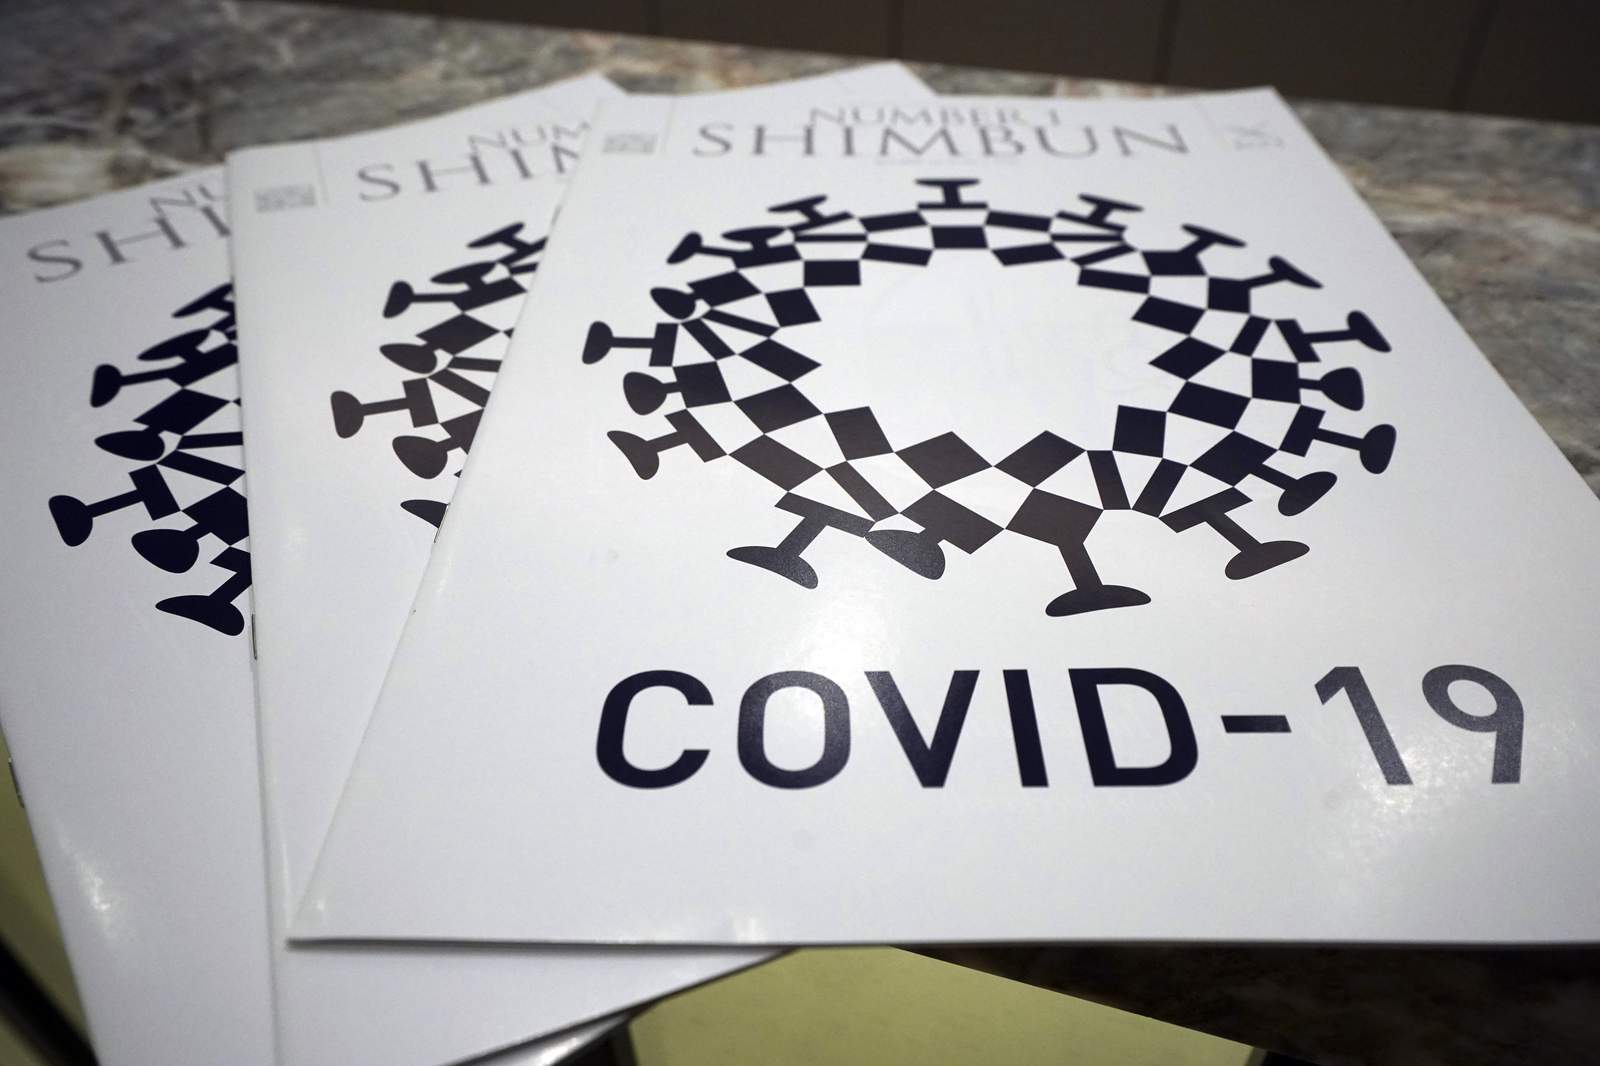 Tokyo Olympics protest parody of logo that depicts COVID-19